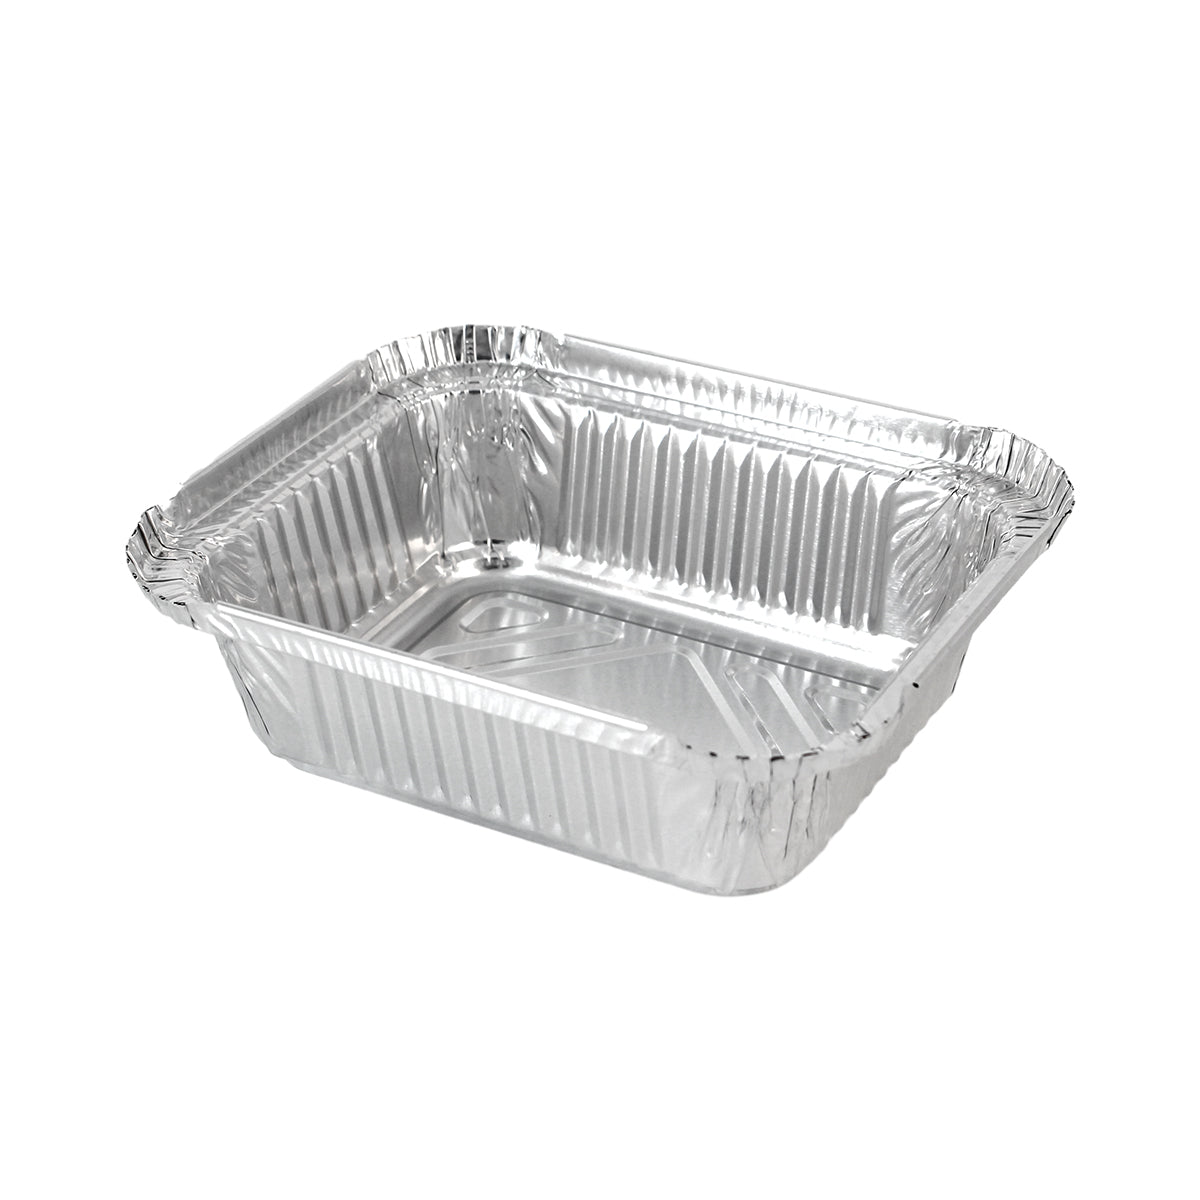 1 LB Oblong Takeout Pan | Recyclable Aluminum